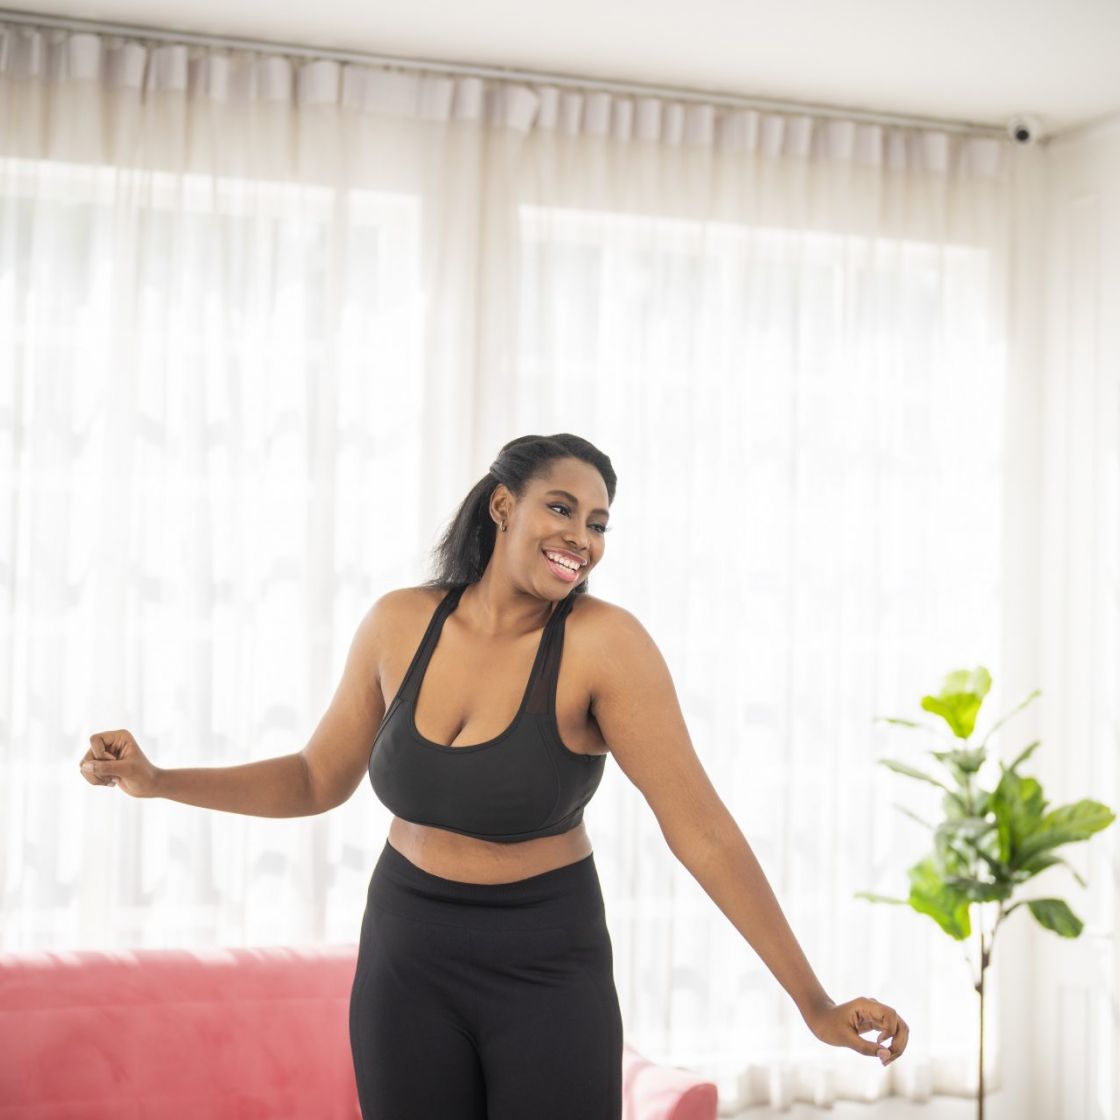 Woman Plus Size in Gym Doing Exercises with Running Training App